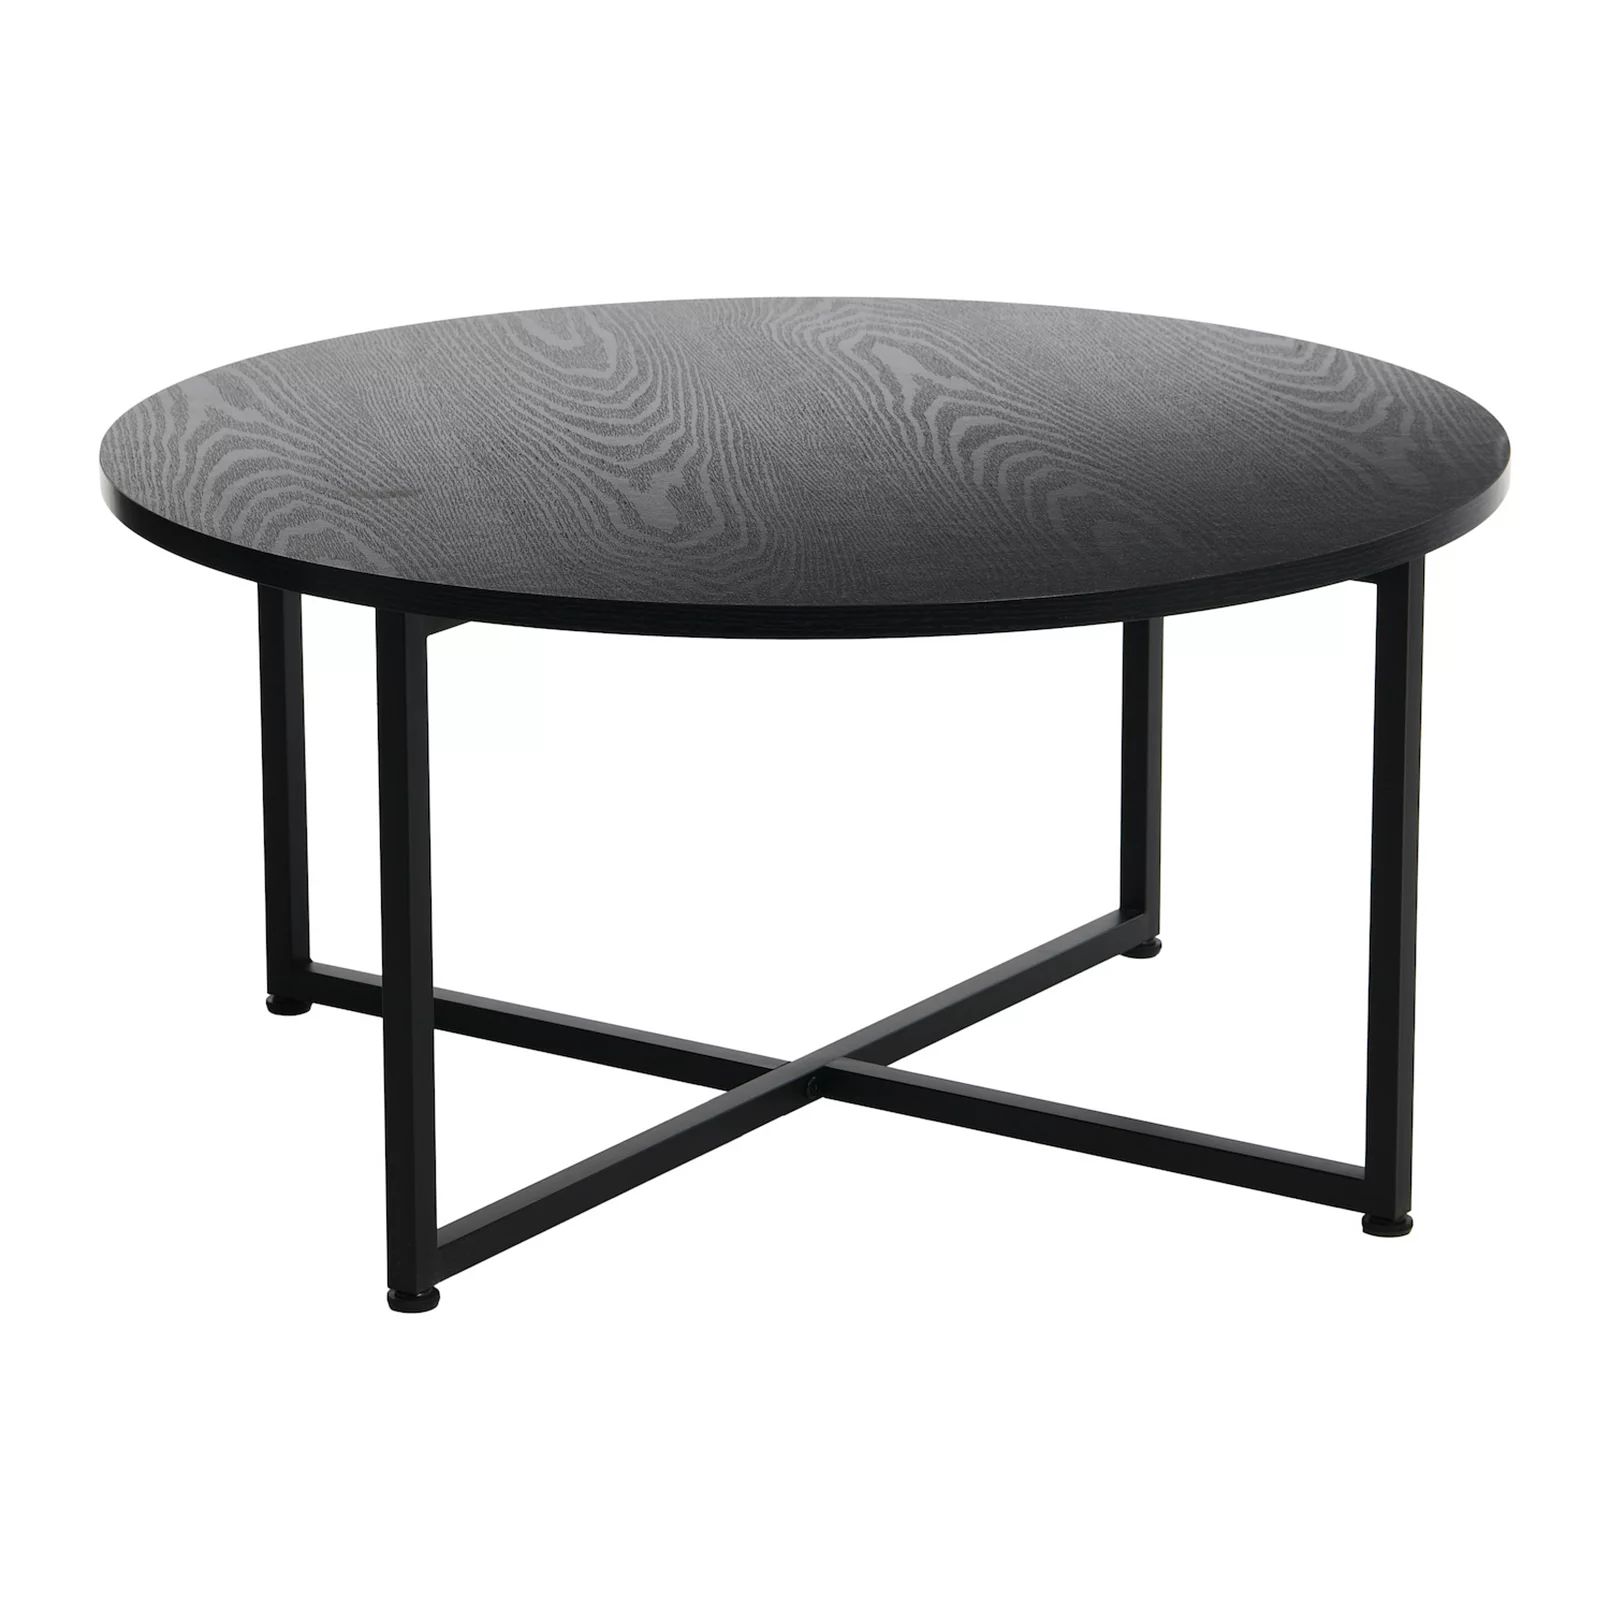 Household Essentials Round Coffee Table | Kohl's